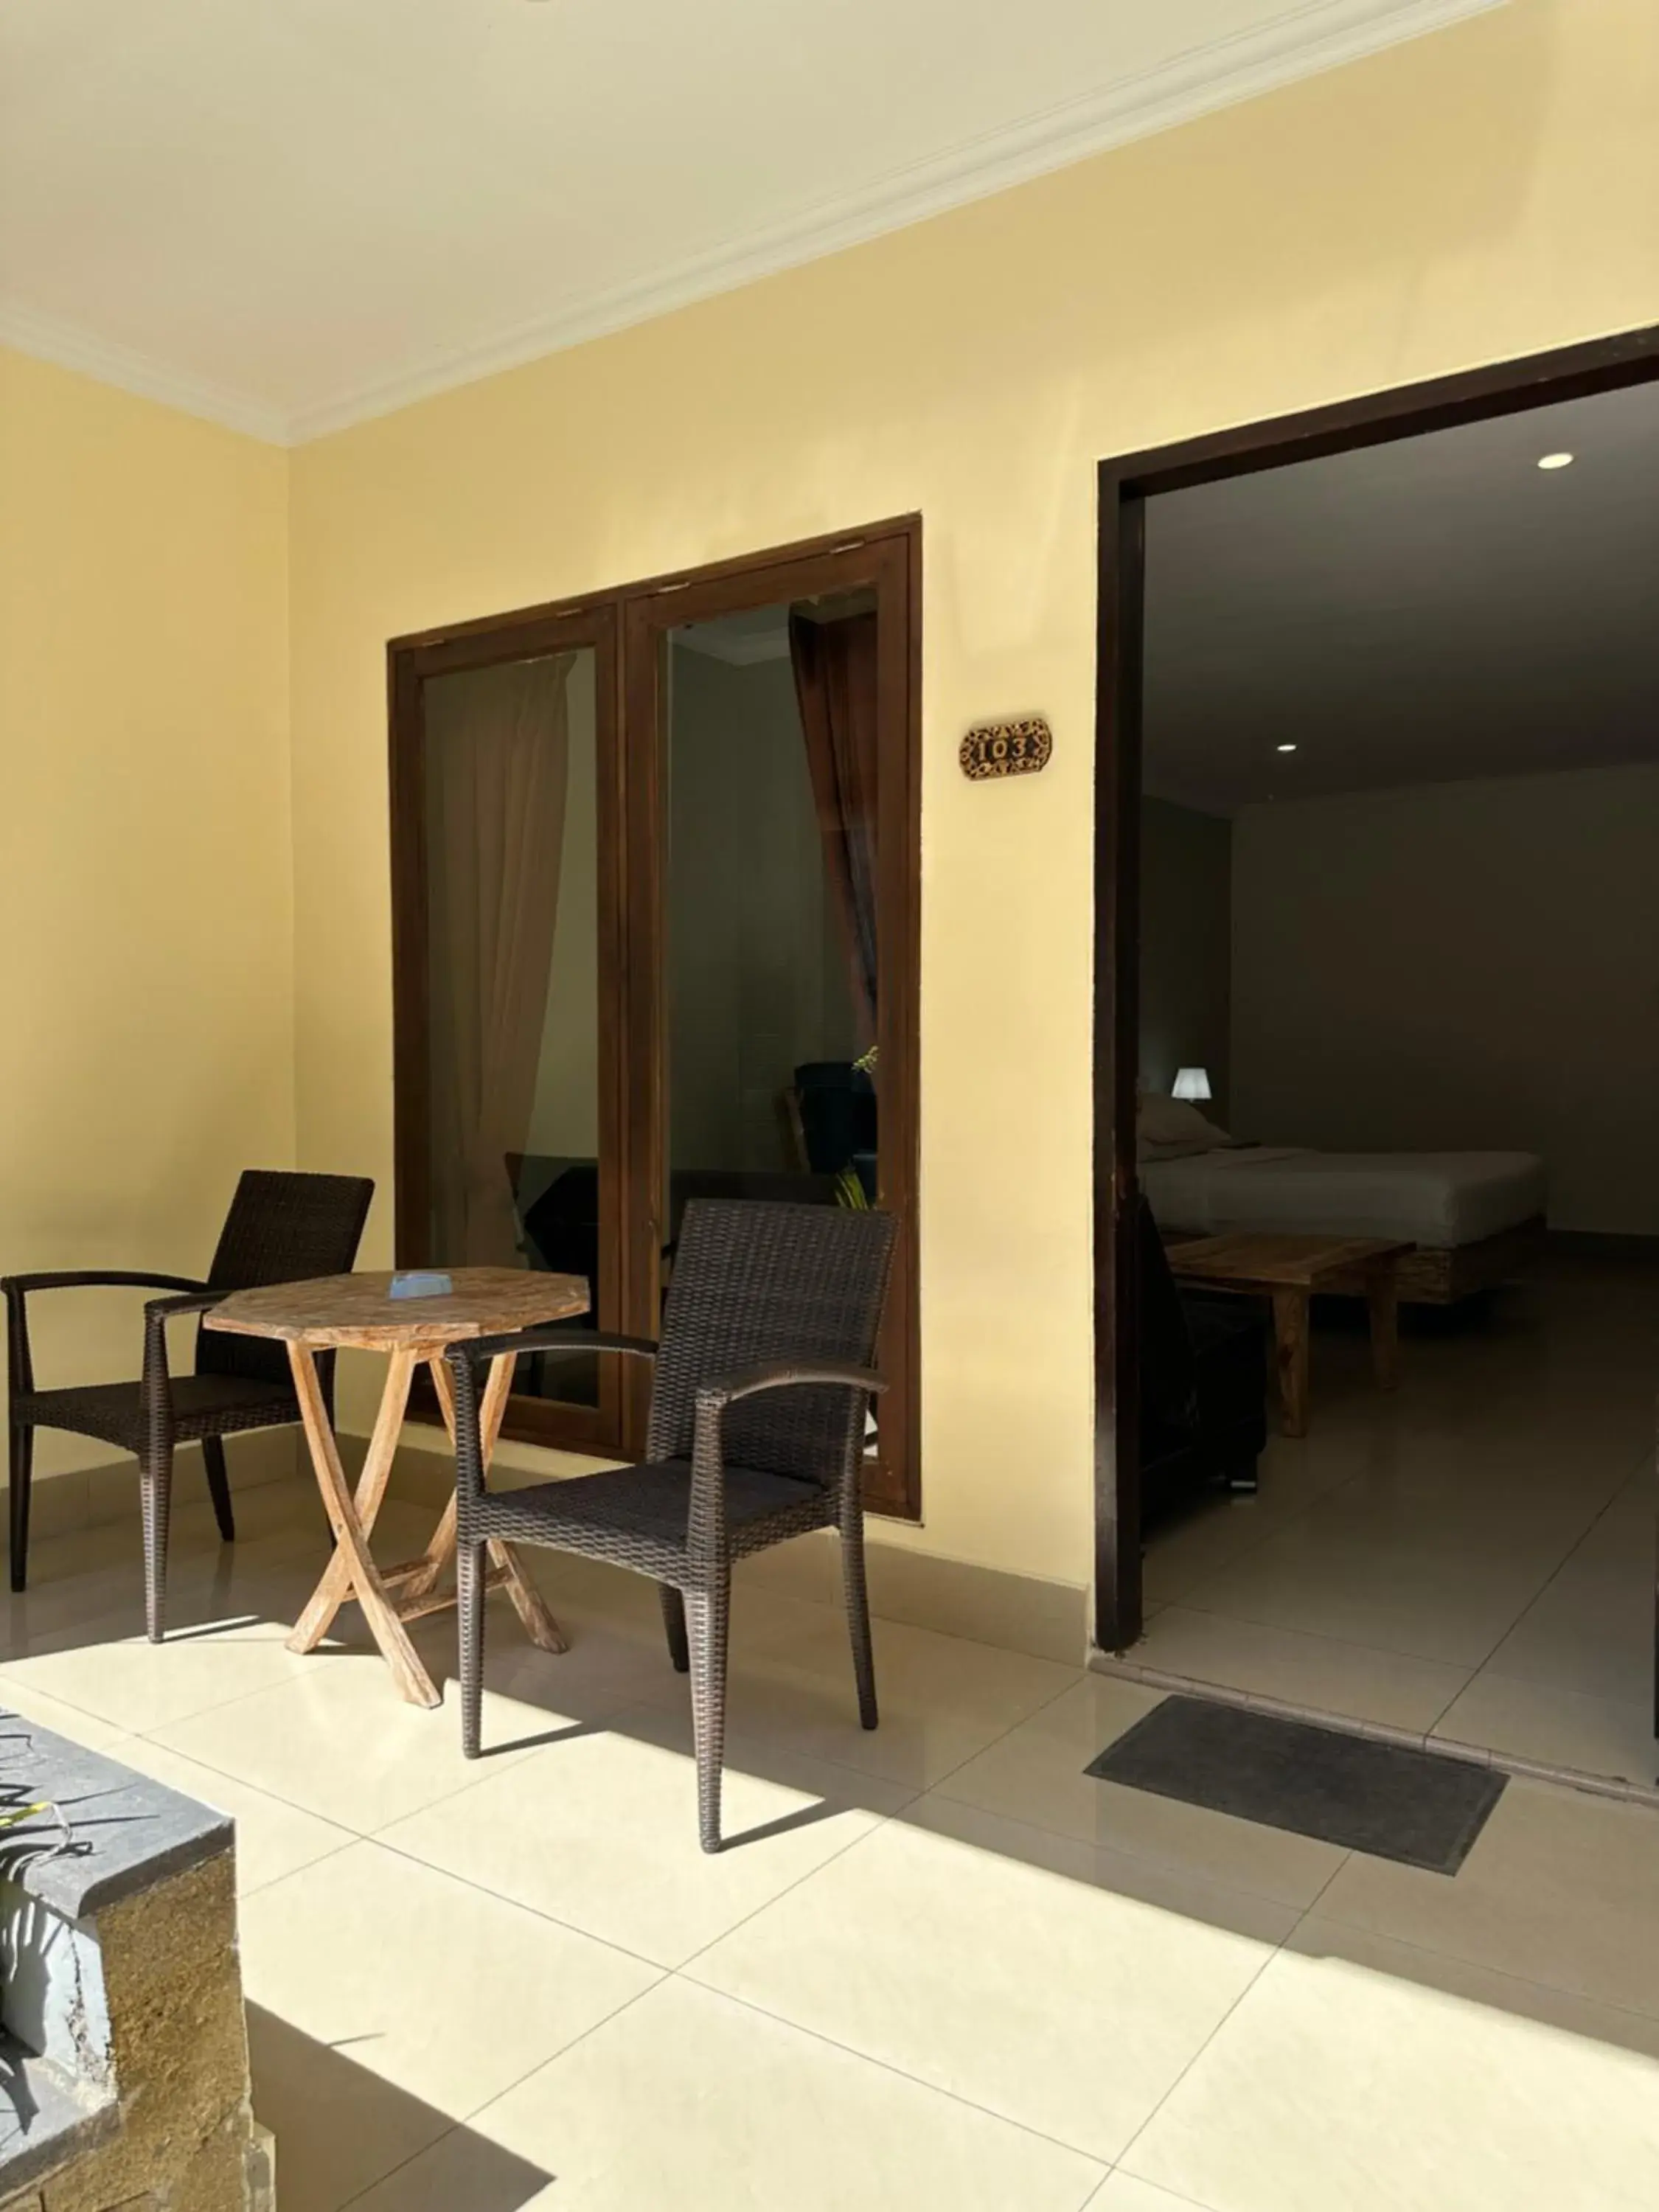 Property building, TV/Entertainment Center in Radha Bali Hotel